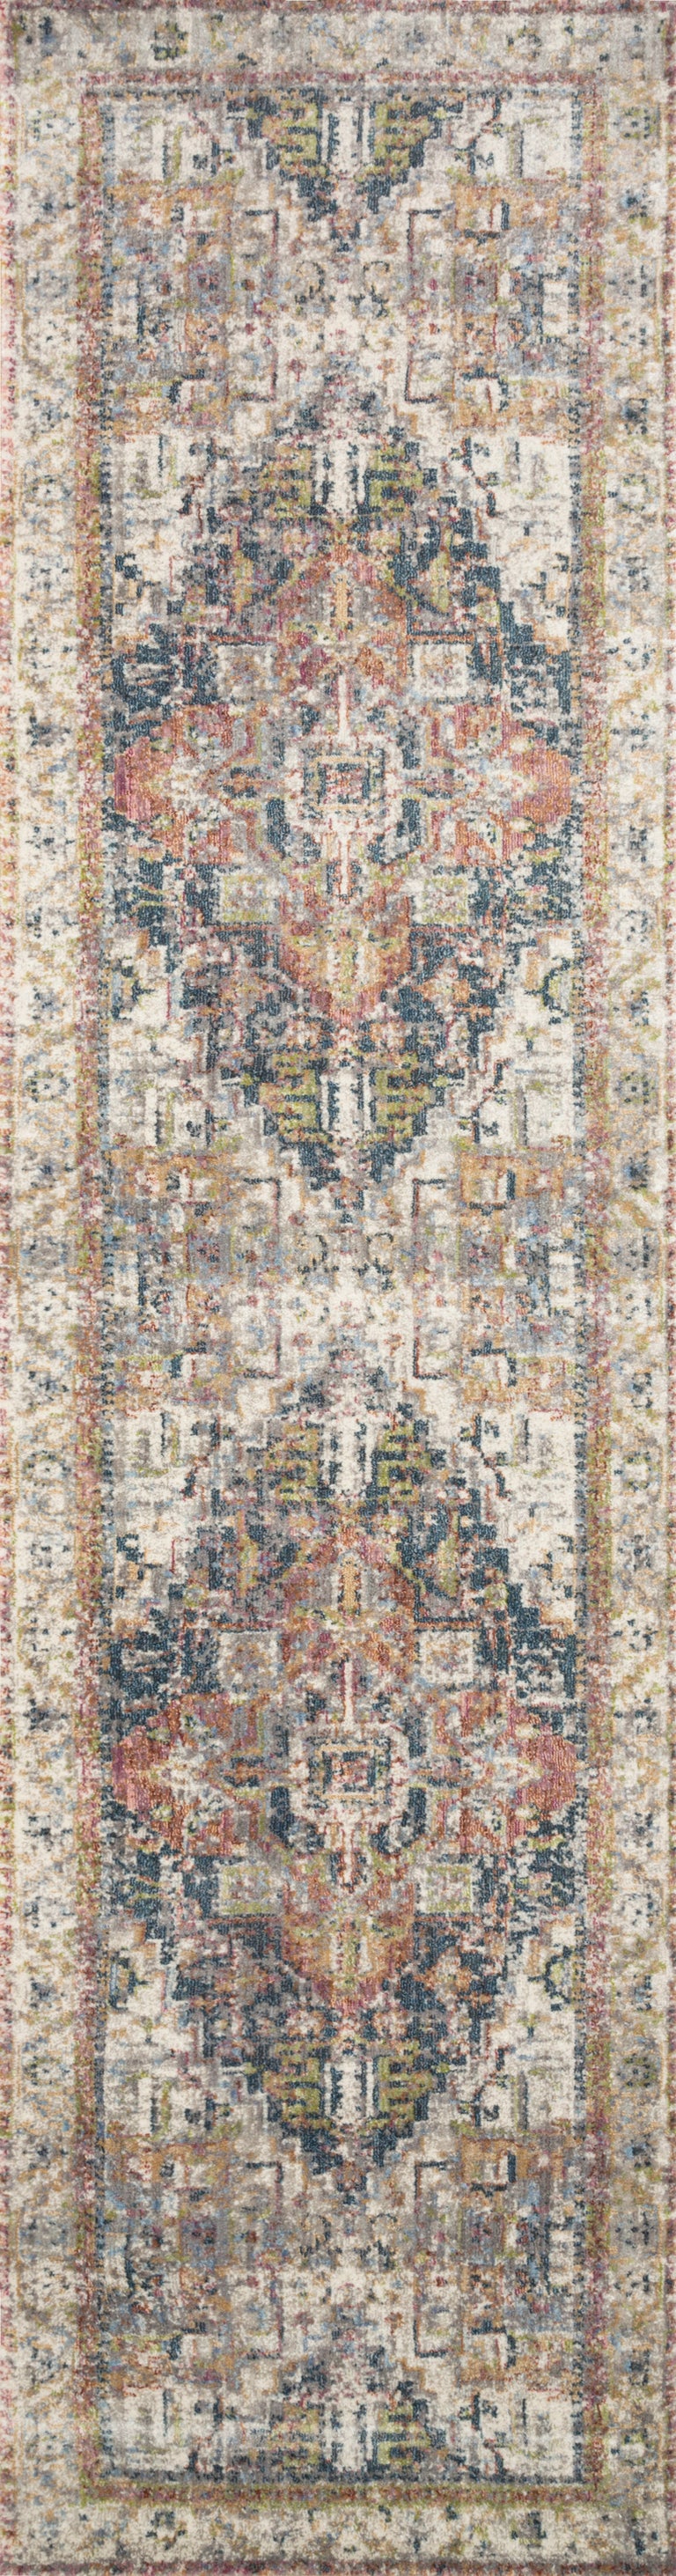 Loloi Rugs Anastasia Collection Rug in Ivory, Multi - 9'6" x 9'6", ANASAF-23IVML960R